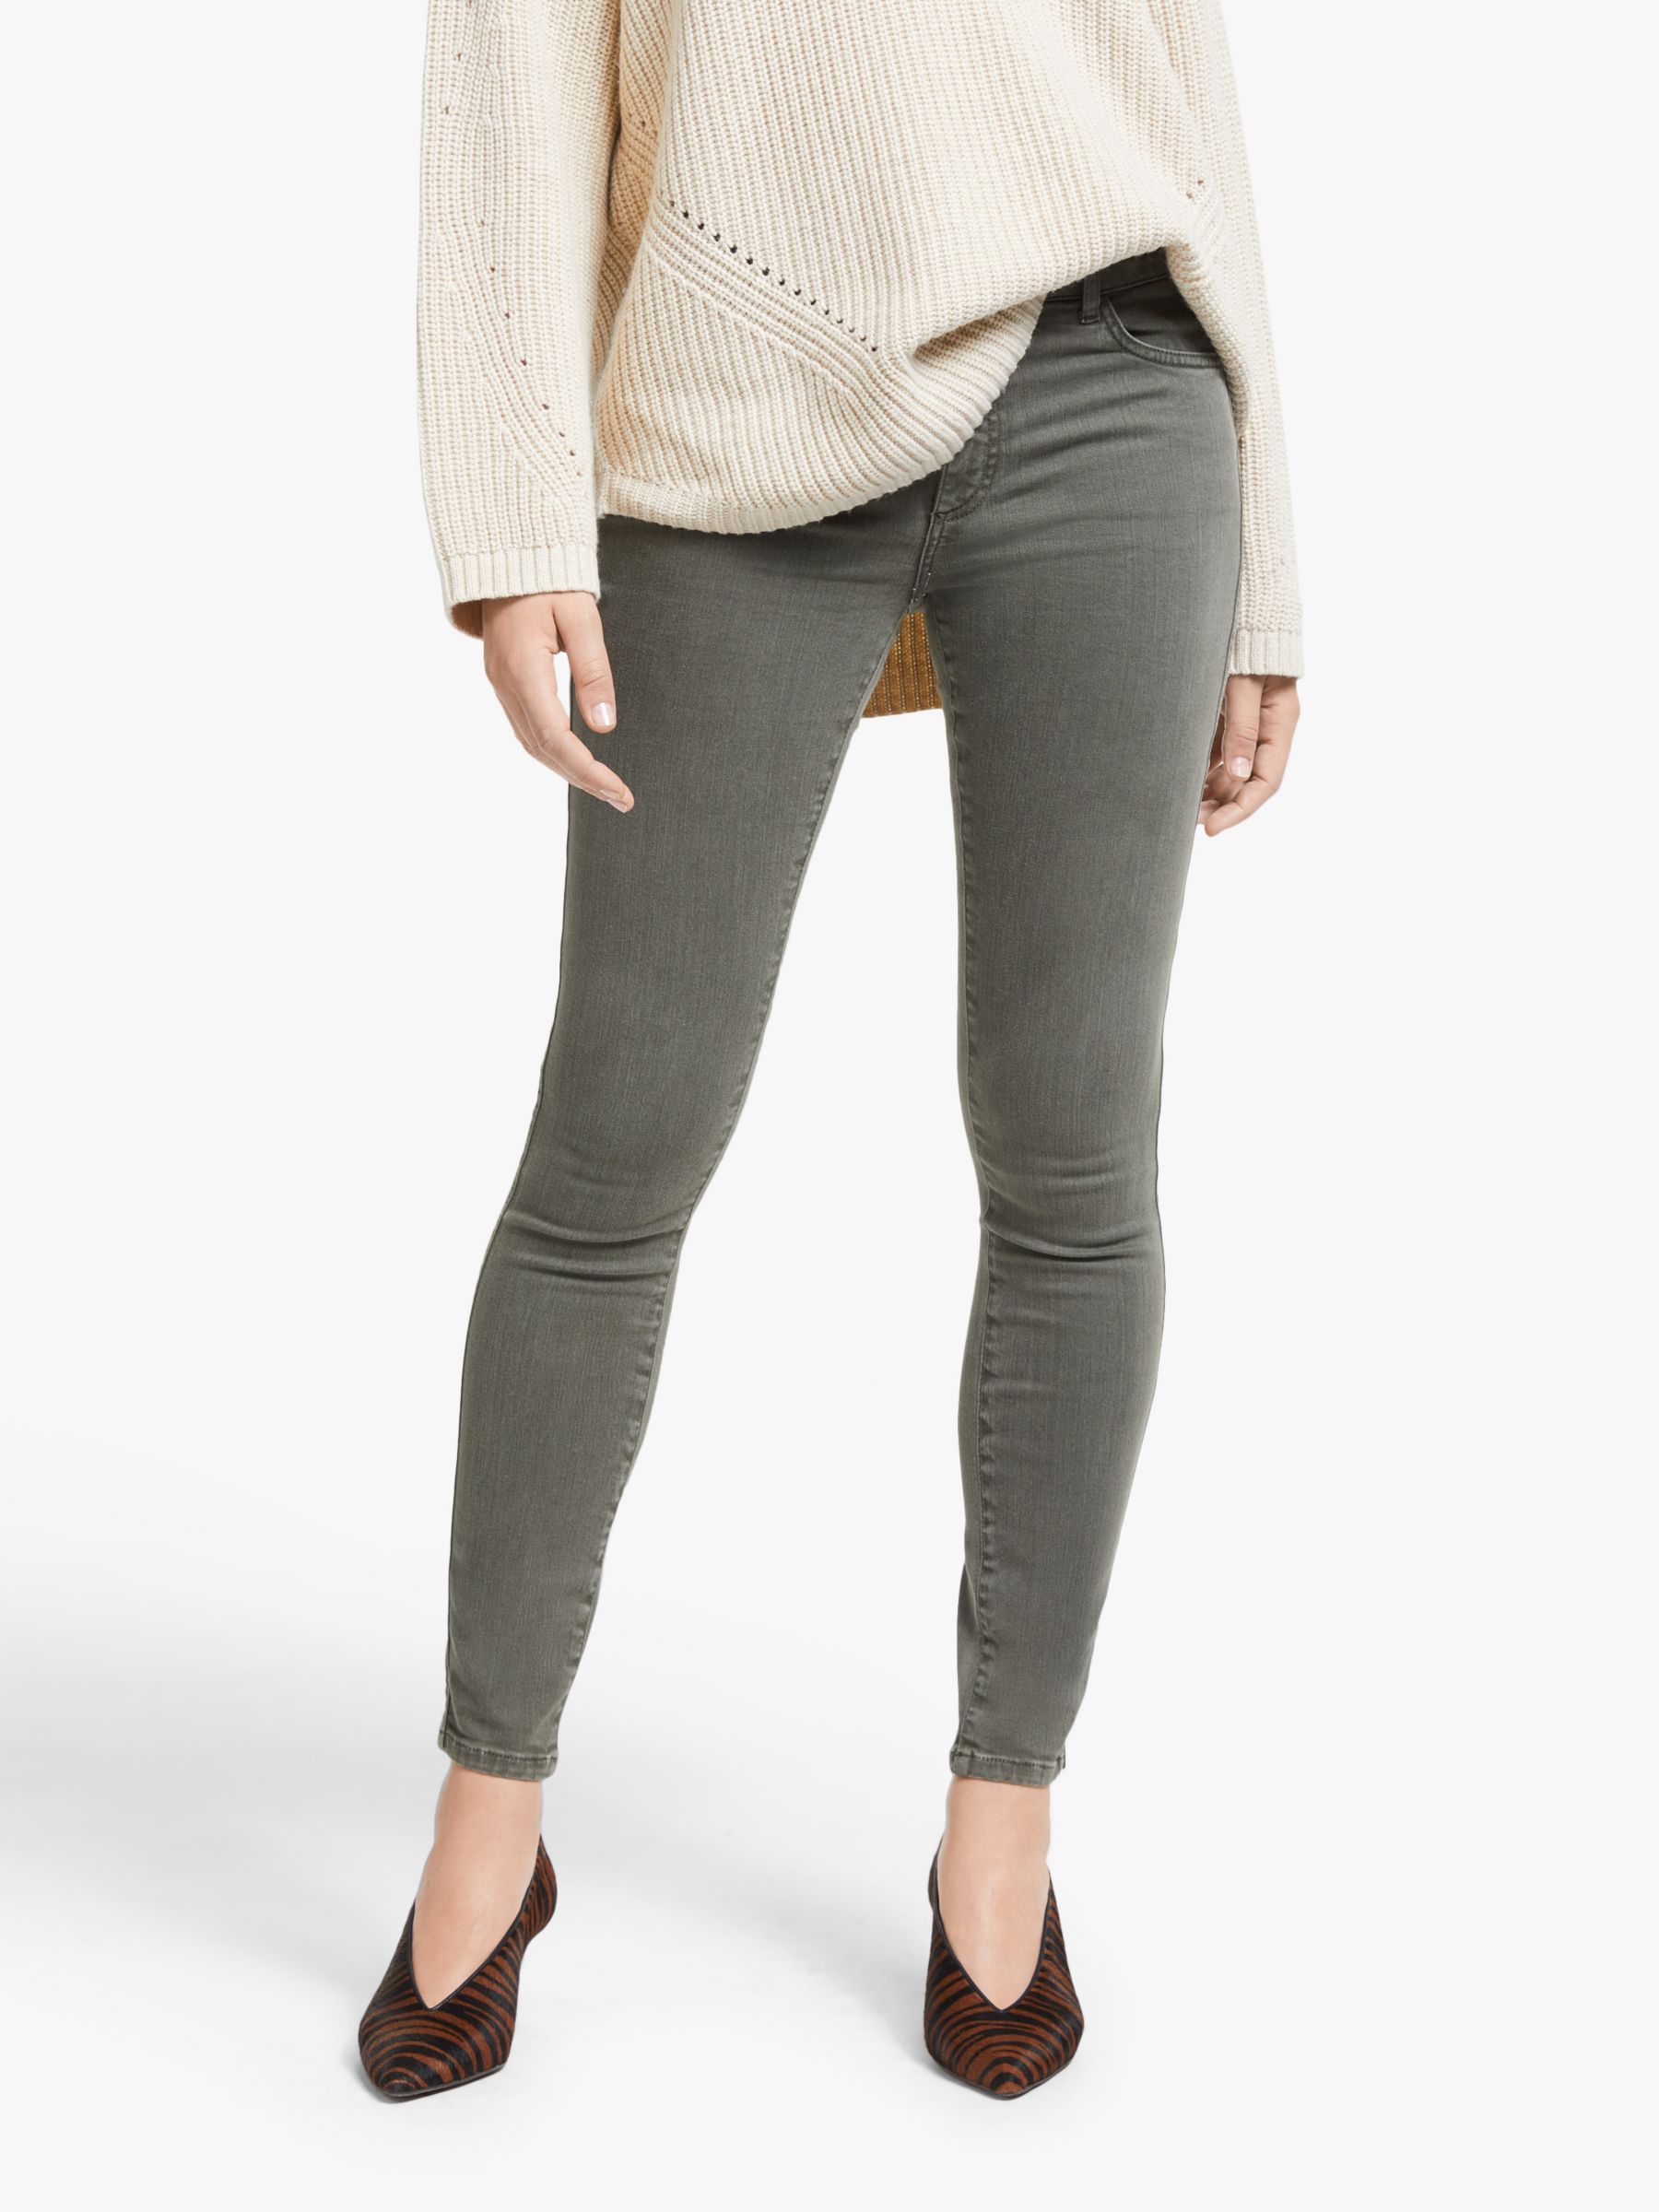 AND/OR Abbot Kinney Skinny Jeans, Spanish Moss at John Lewis & Partners